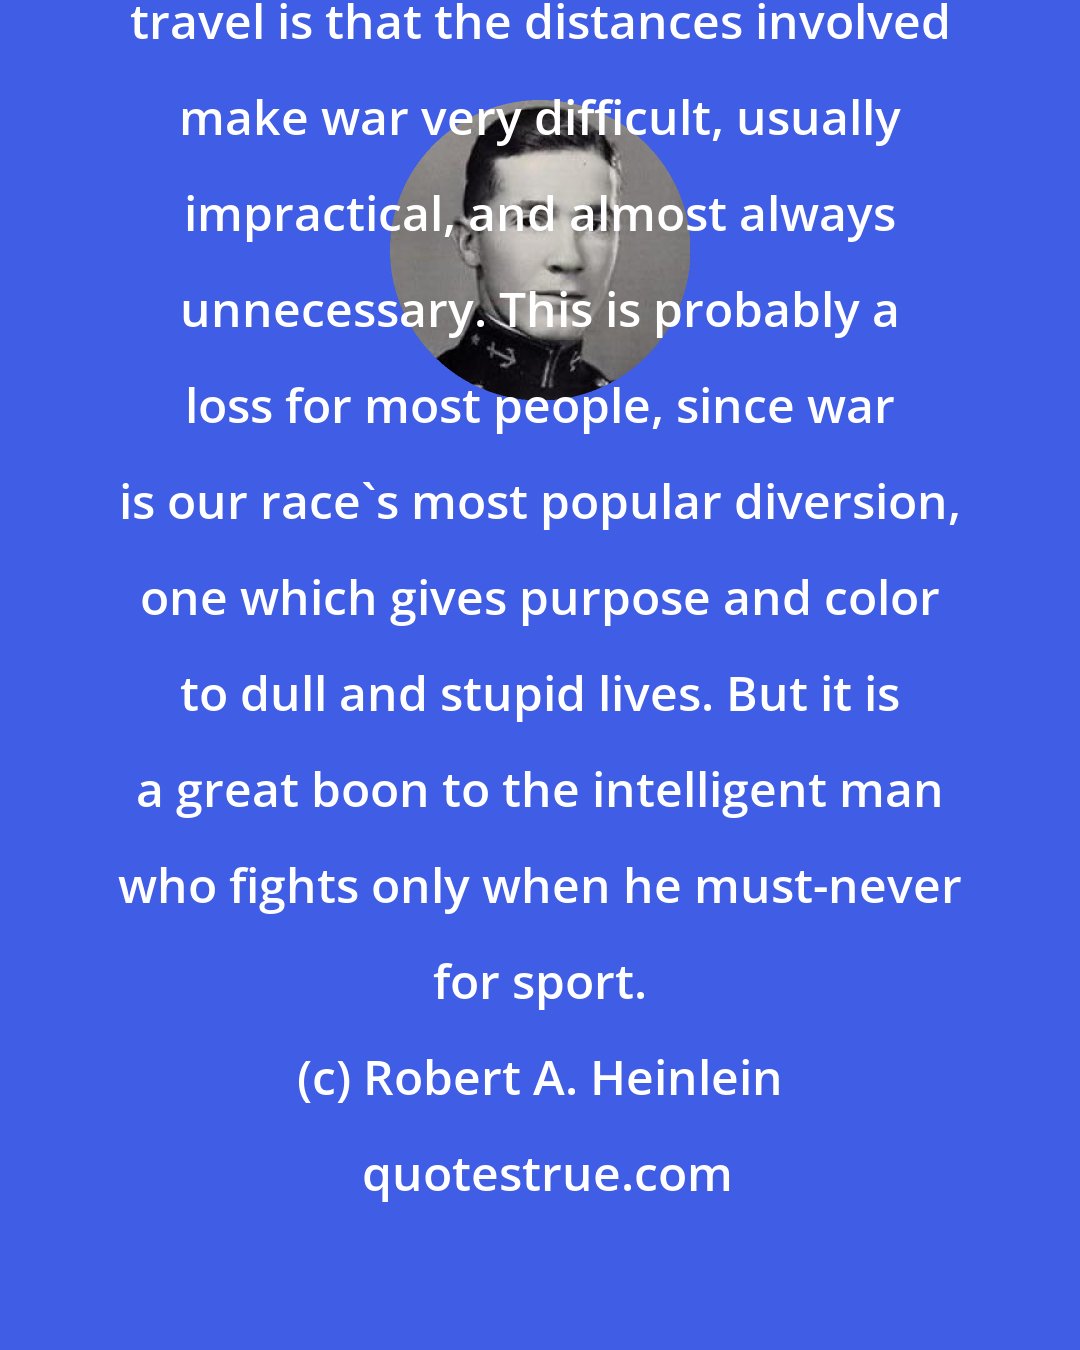 Robert A. Heinlein: The second best thing about space travel is that the distances involved make war very difficult, usually impractical, and almost always unnecessary. This is probably a loss for most people, since war is our race's most popular diversion, one which gives purpose and color to dull and stupid lives. But it is a great boon to the intelligent man who fights only when he must-never for sport.